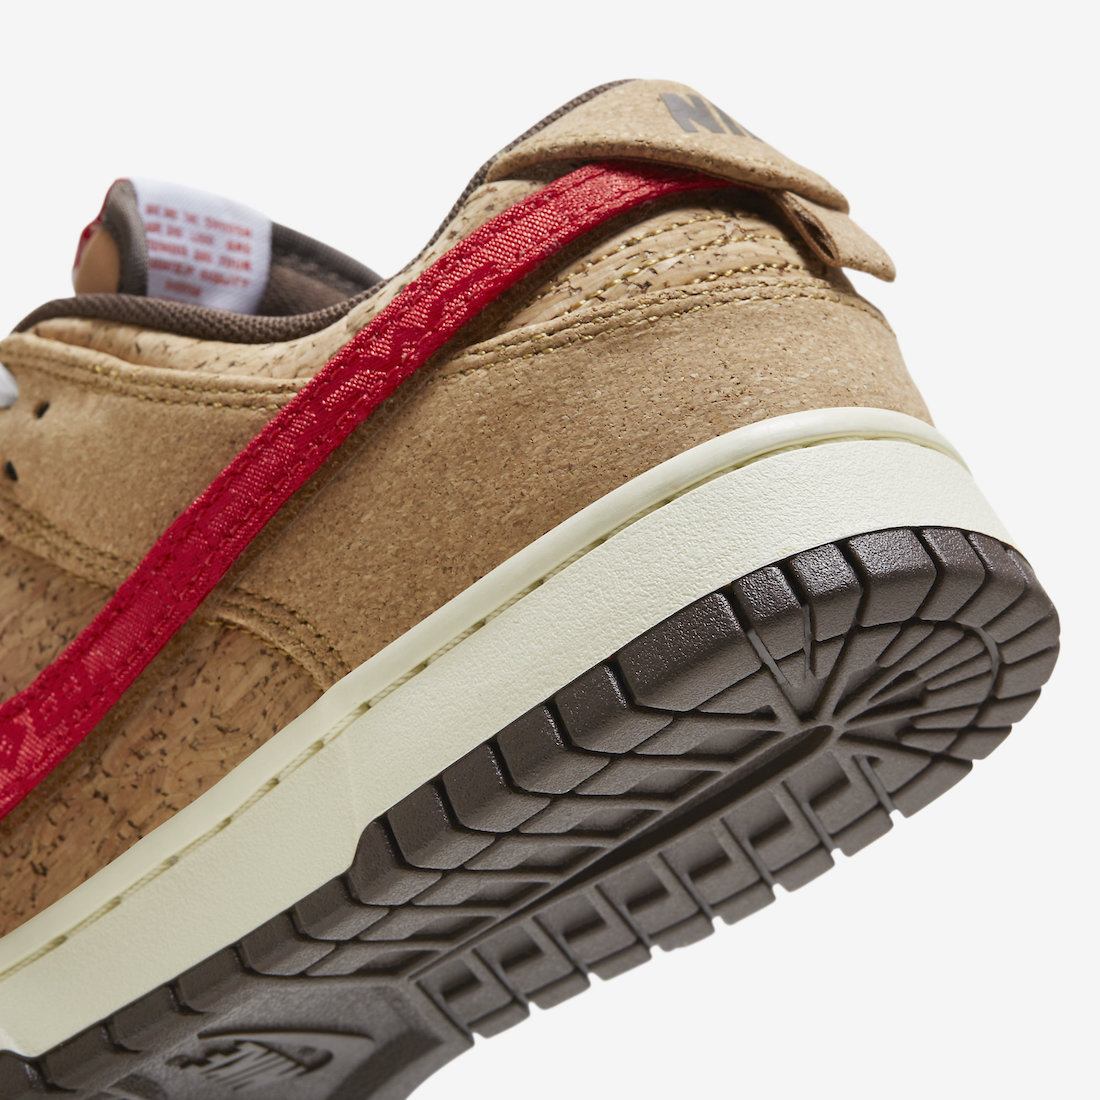 CLOT x Kith and Nike may have a new collaboration arriving this year Cork